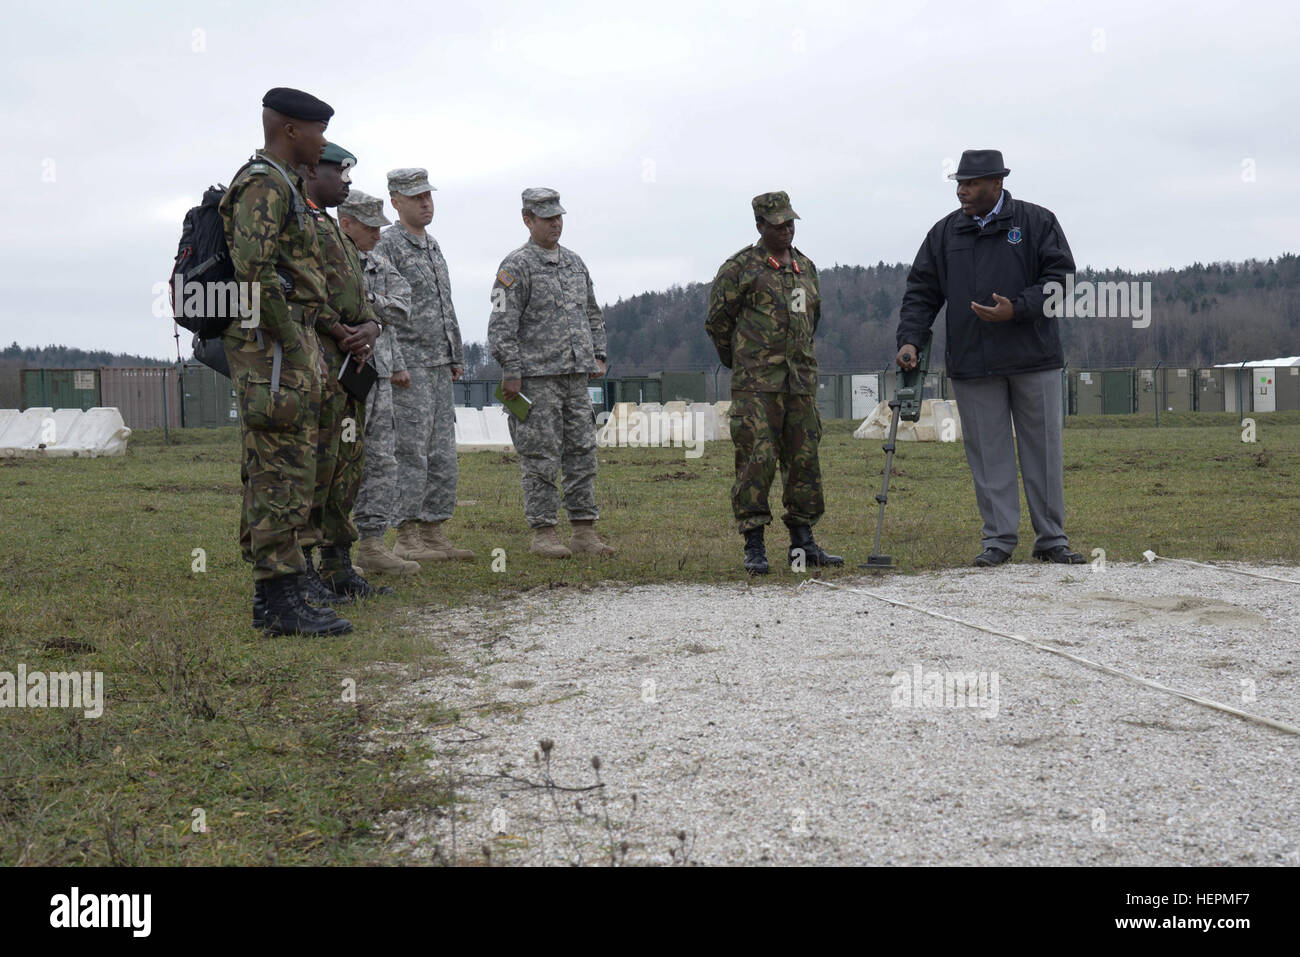 Members of the Botswana Defense Force receive instruction on detecting improvised explosive devices as part of a Counter IED brief during a command-sponsored visit to the Joint Multinational Readiness Center in Hohenfels, Germany, Dec. 3, 2015. The visit allowed leadership from Botswana to observe facilities and capabilities to explore future opportunities for training and partnership. (U.S. Army photo by Spc. Nathanael Mercado/Released) USARAF Botswana JMRC-JMTC visit 151203-A-DN311-087 Stock Photo